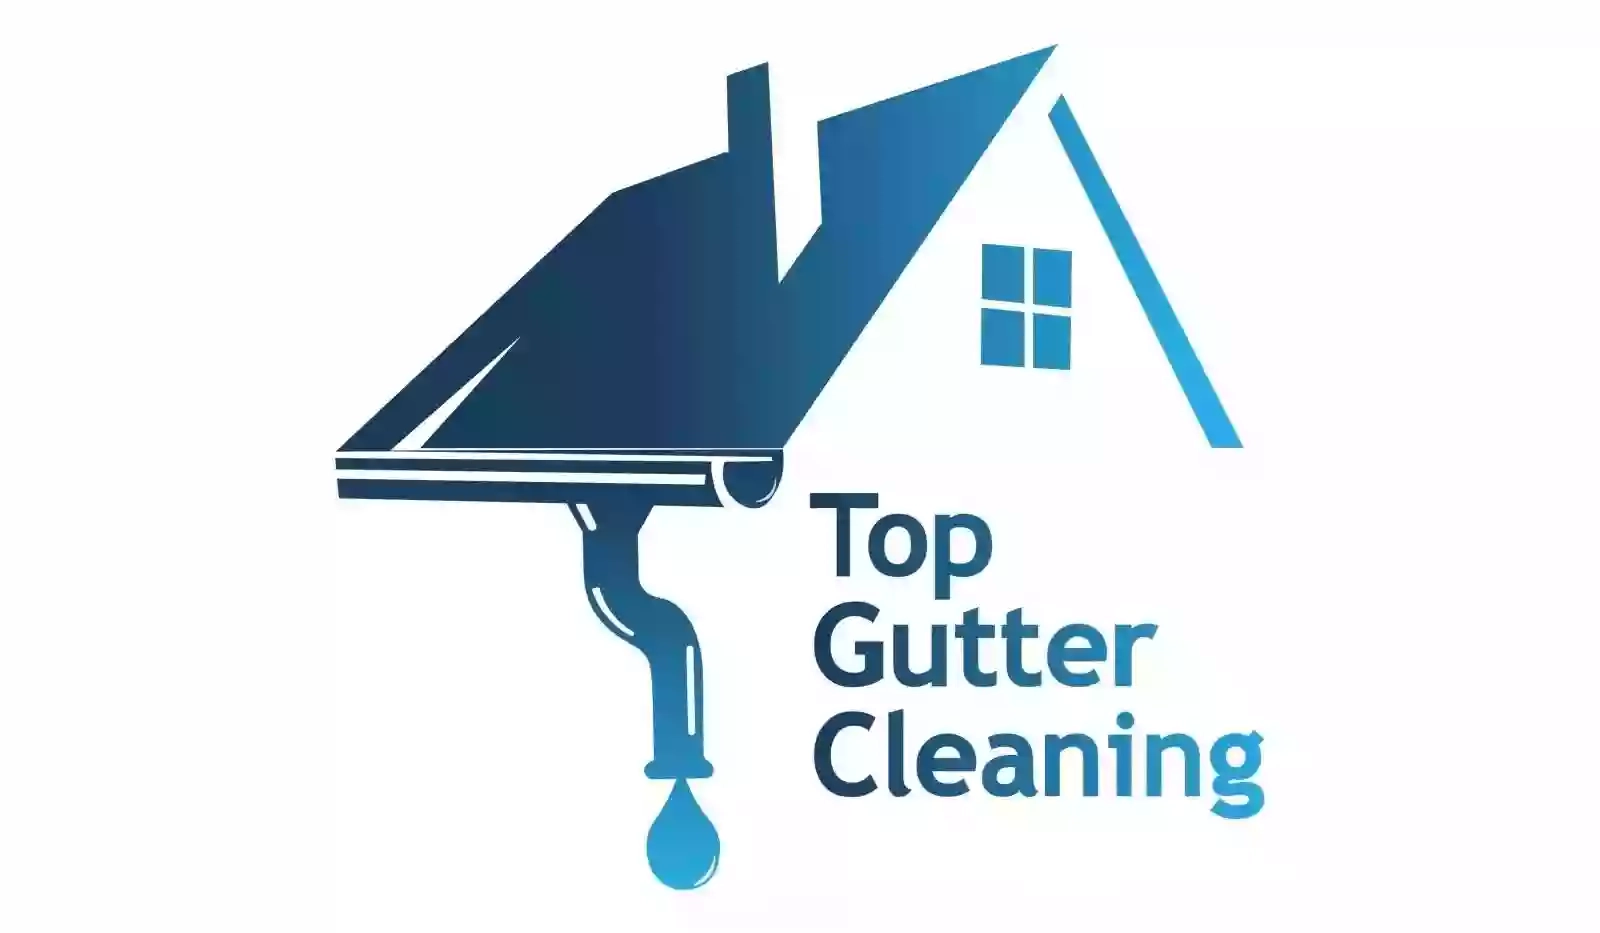 Top Gutter Cleaning